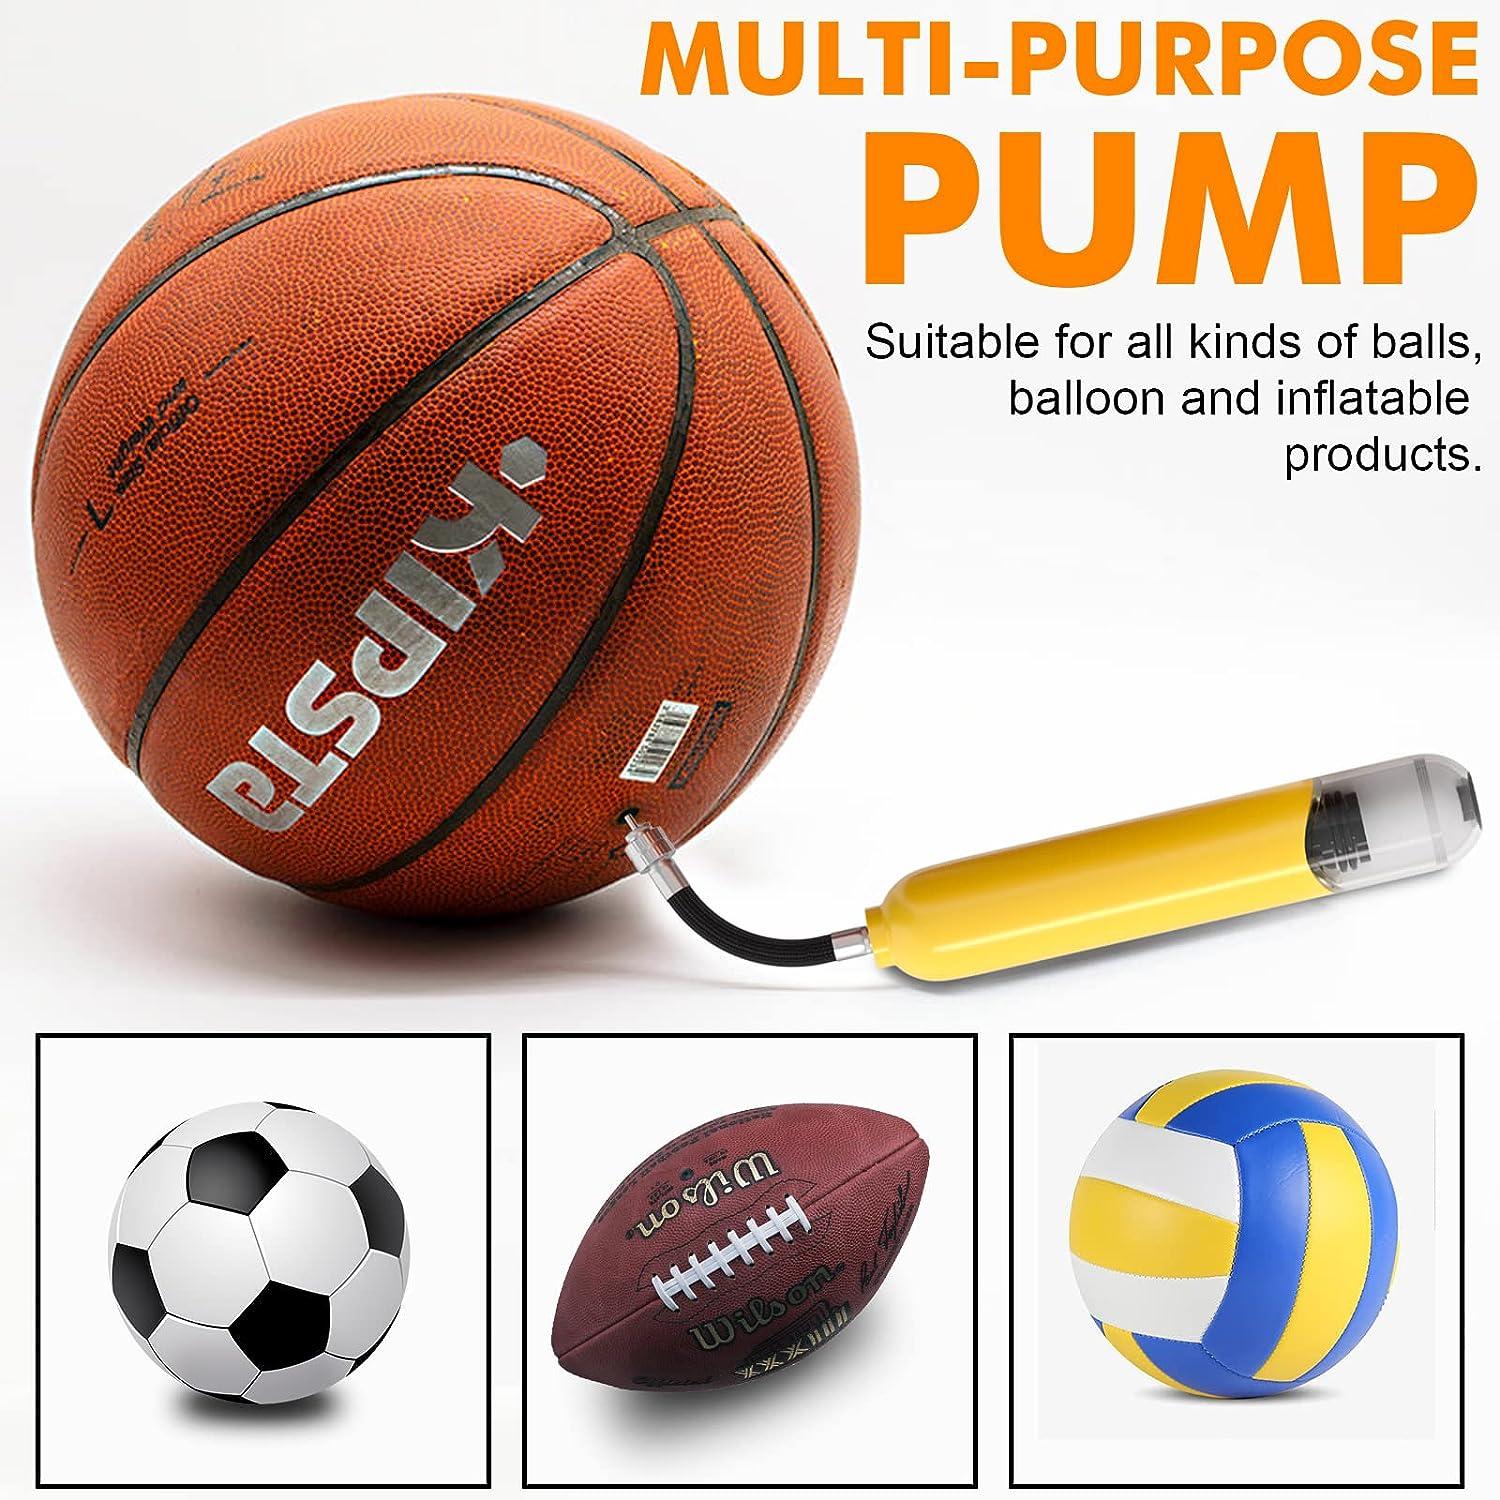 Amble Air Ball Pump for Basketball, Soccer Ball, Volleyball, Football,  Balloons Pump Inflator - Portable Hand Exercise Sports Ball Pump Kit with 5 Inflation  Needles, Nozzle, Hose & Air Pressure Gauge Yellow